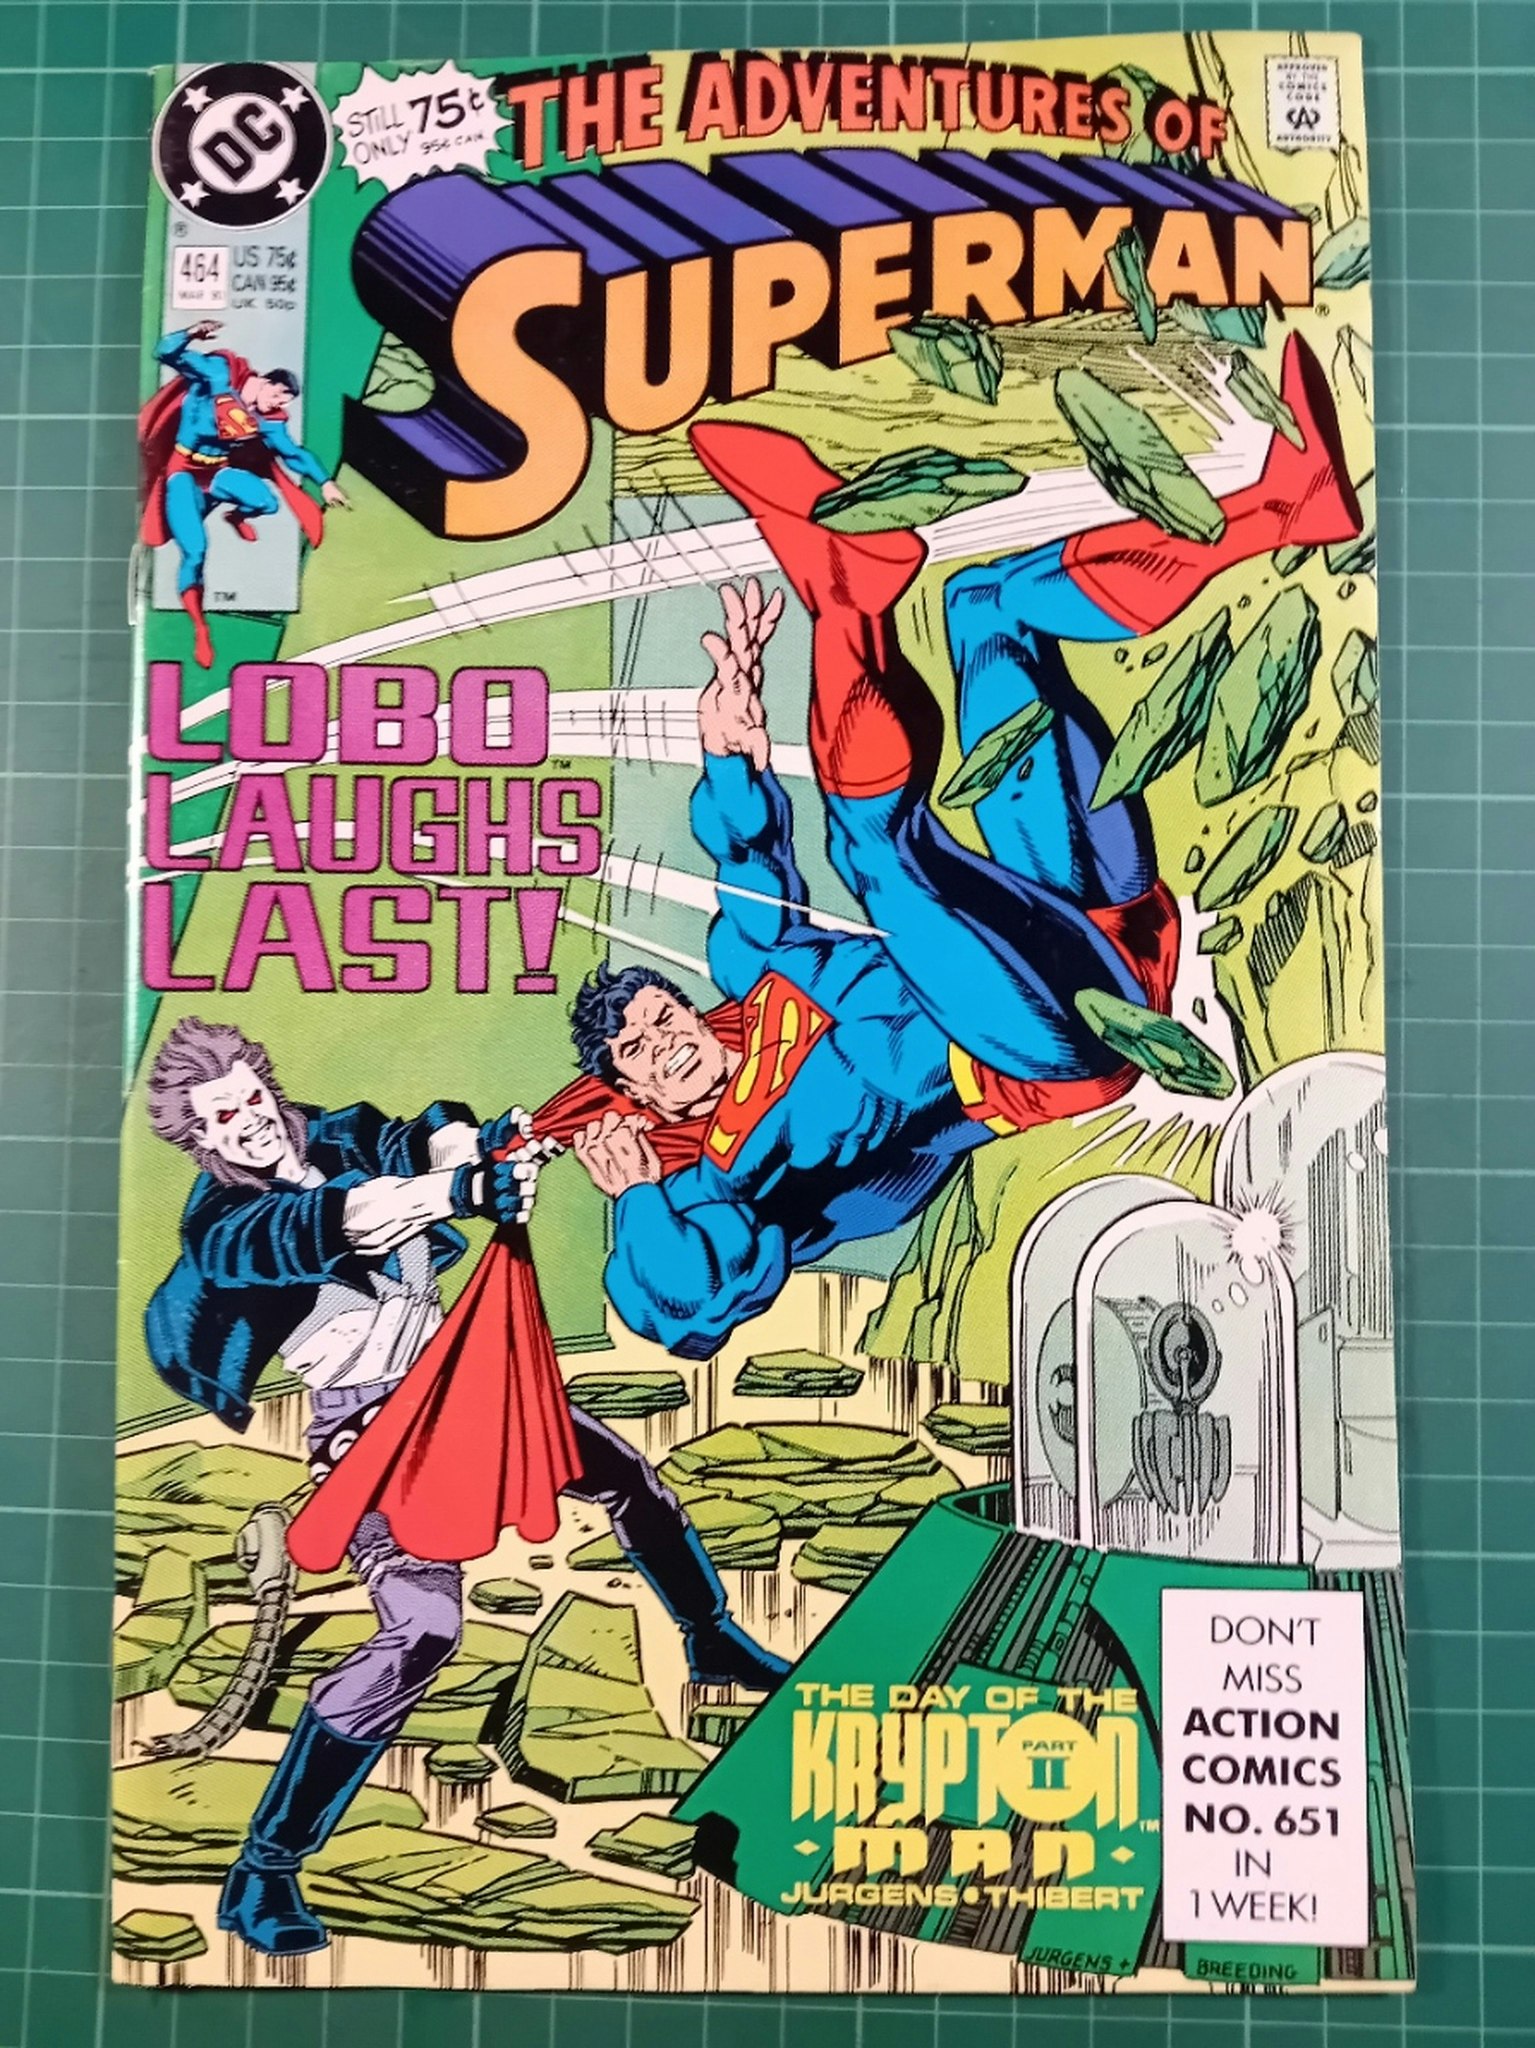 The adventures of Superman #464